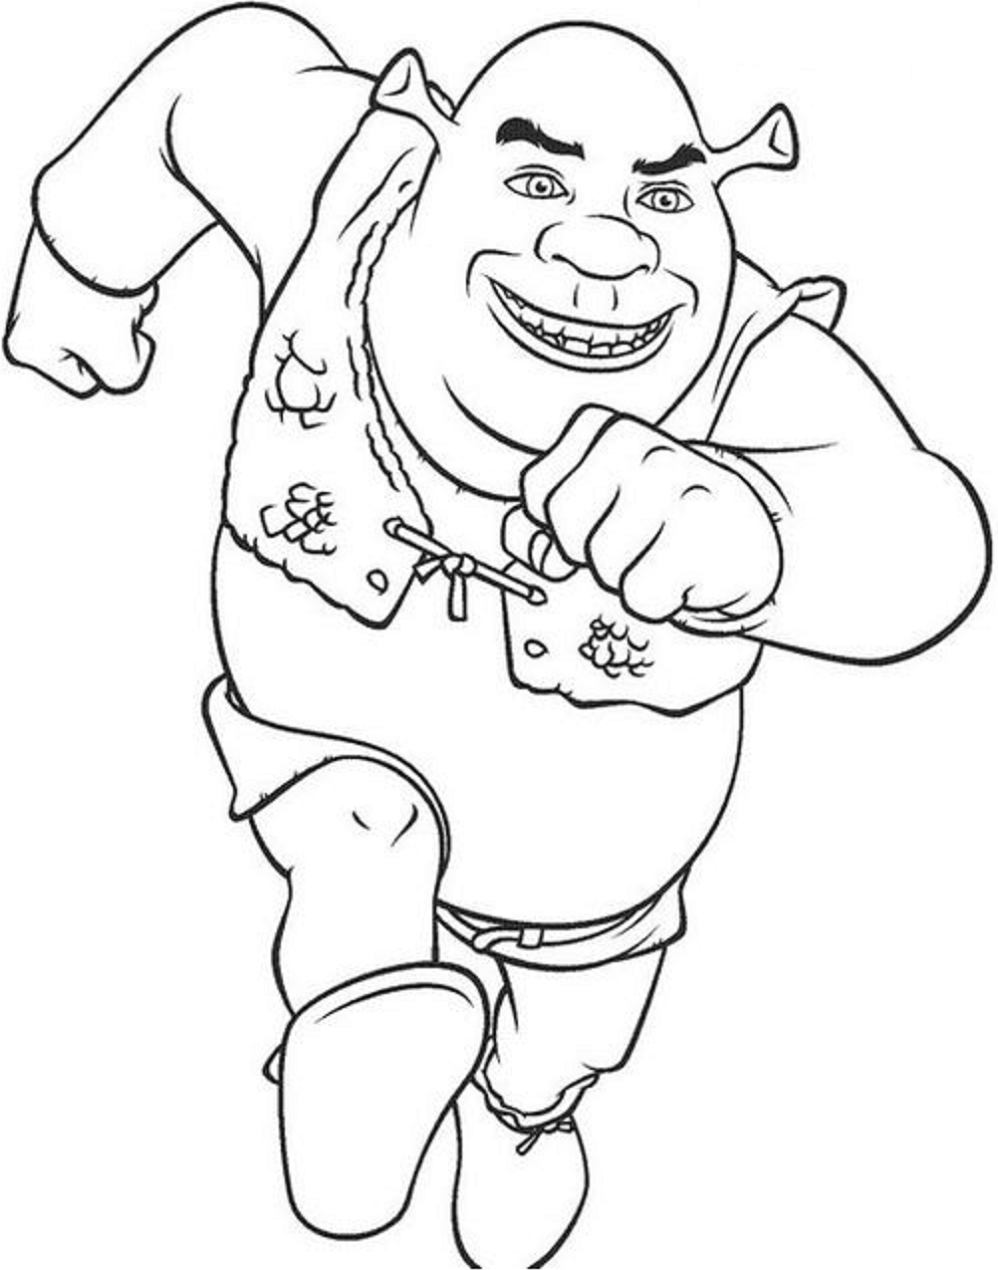 Download 153+ Penciling To Color Fiona And Shrek Dance Coloring Pages